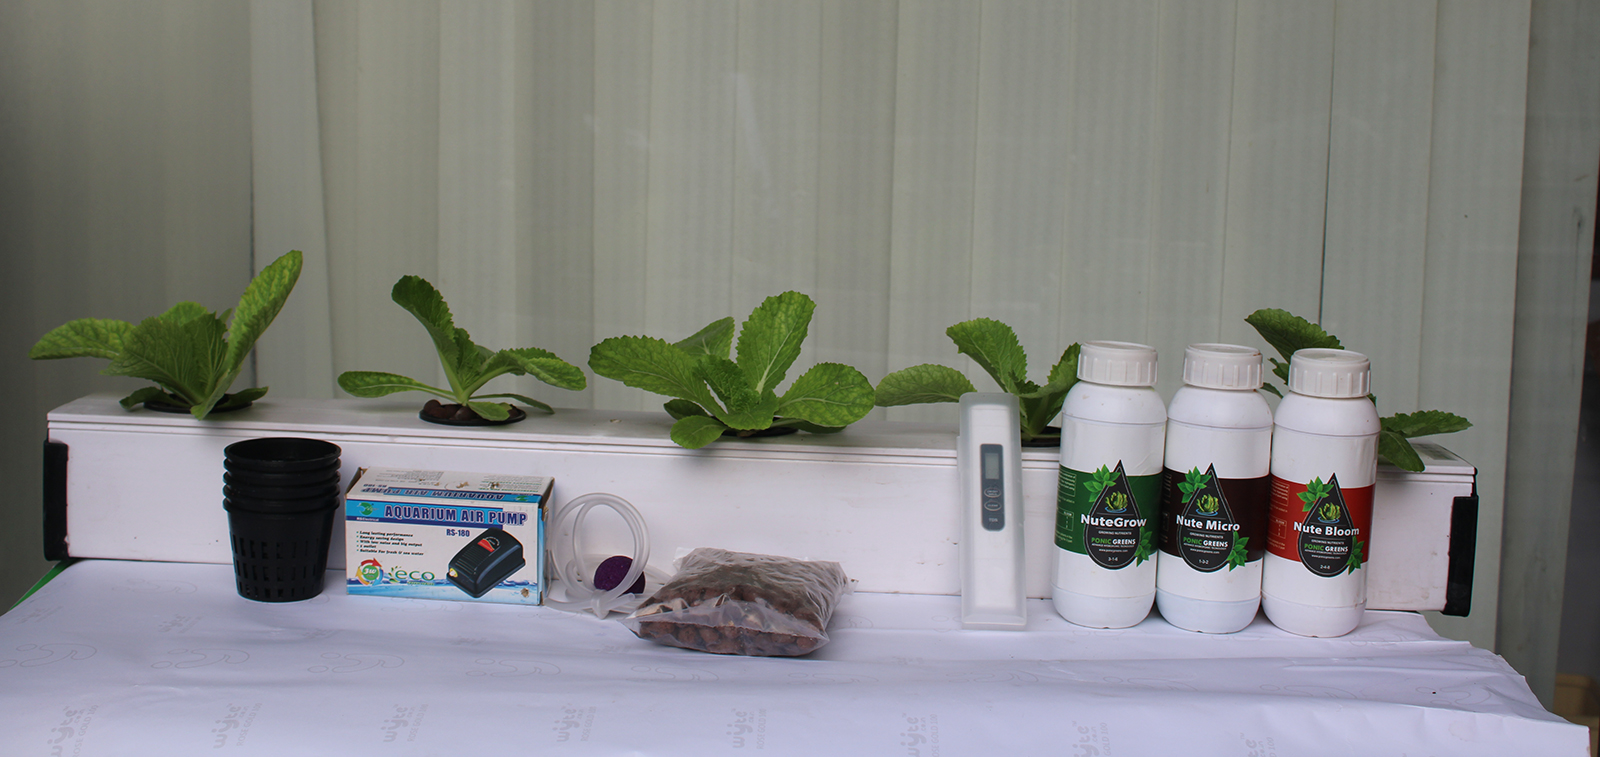 How to make a DIY Hydroponic system step by step